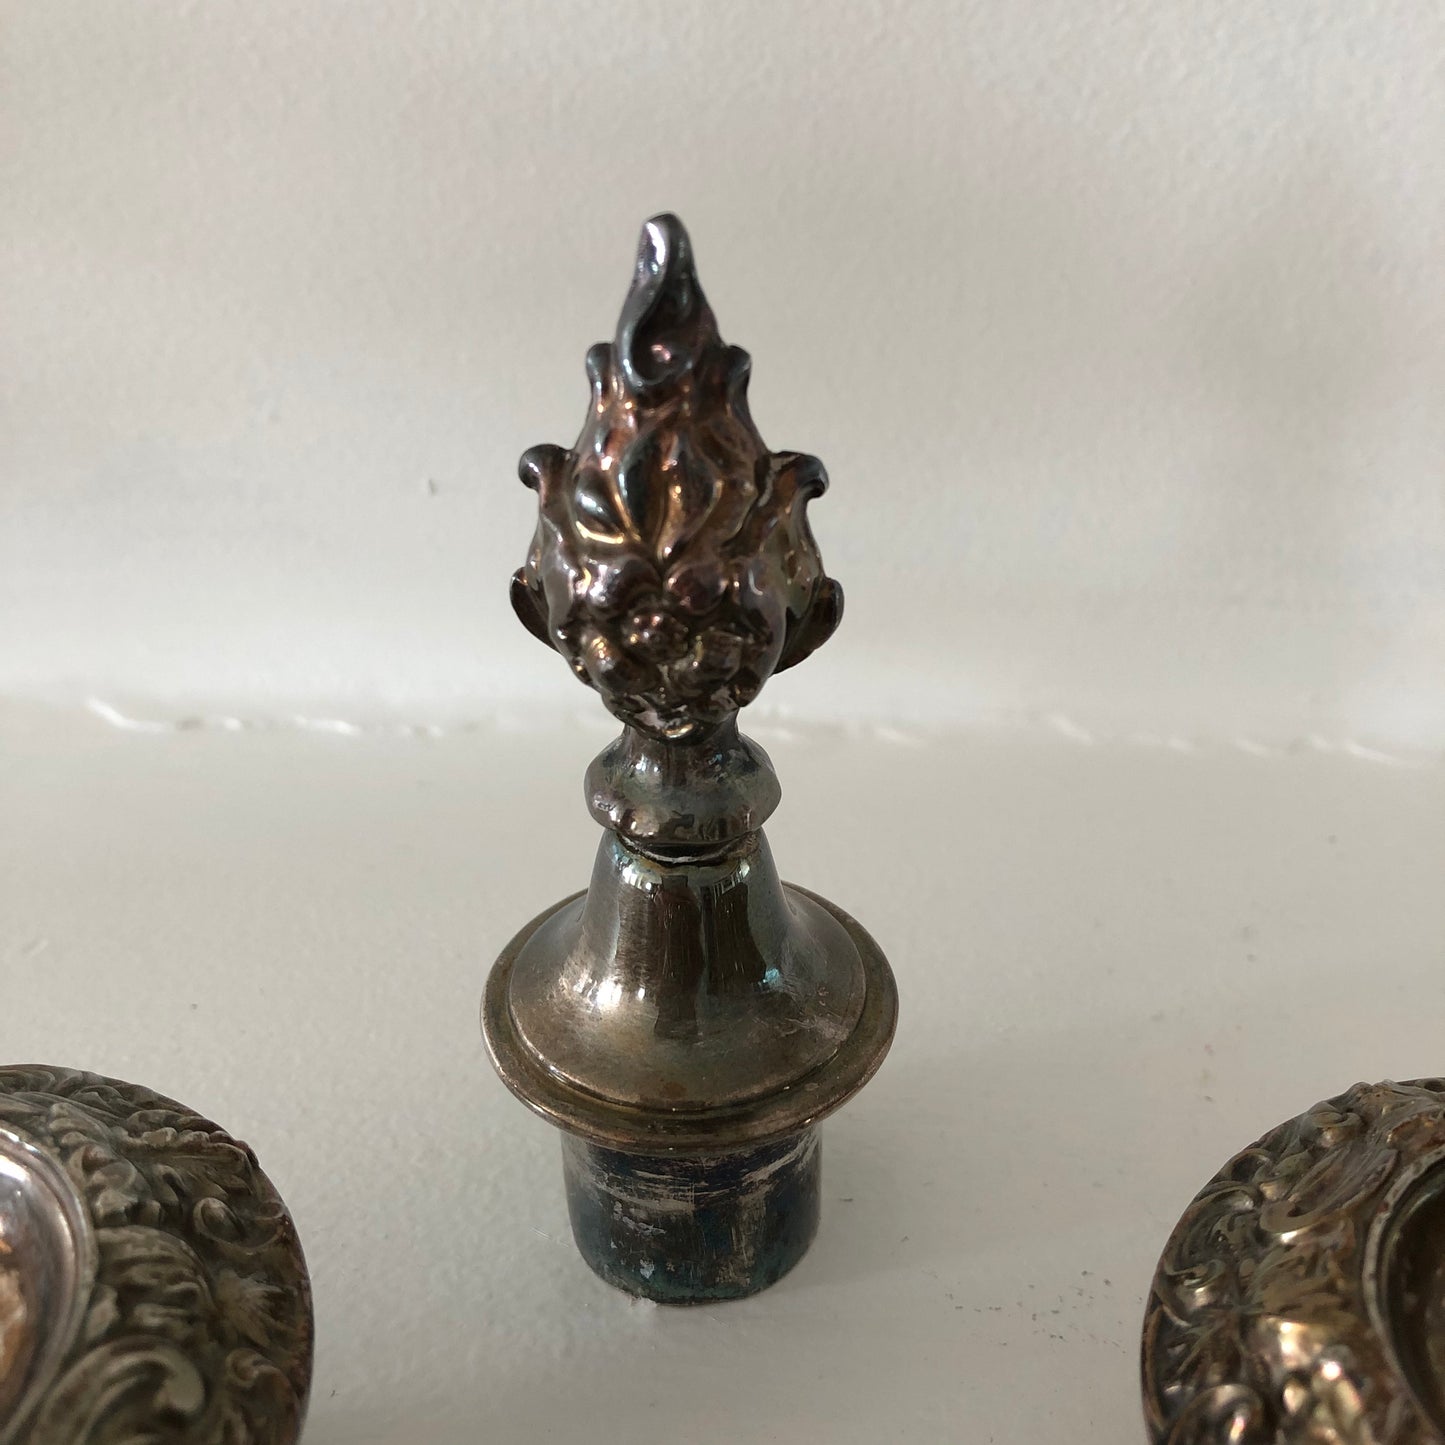 Pair of Silver Plate Candelabras